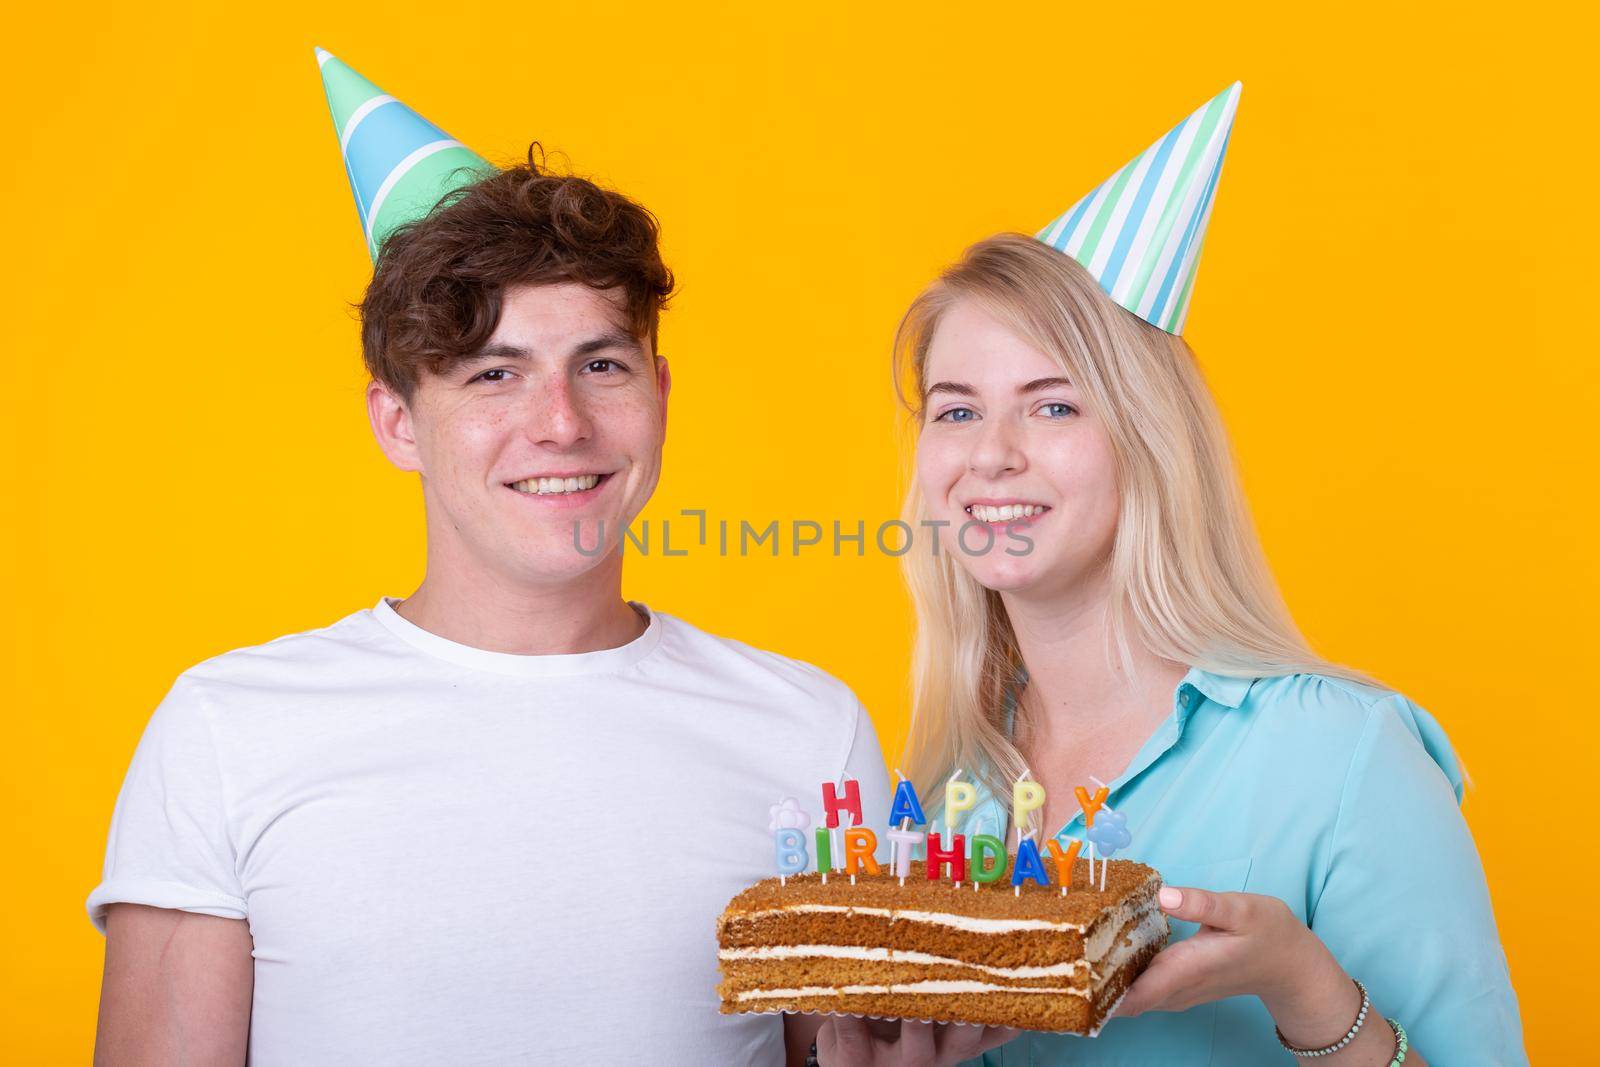 Funny young couple in paper caps and with a cake make a foolish face and wish happy birthday while standing against a yellow background. Concept of congratulations and fooling around